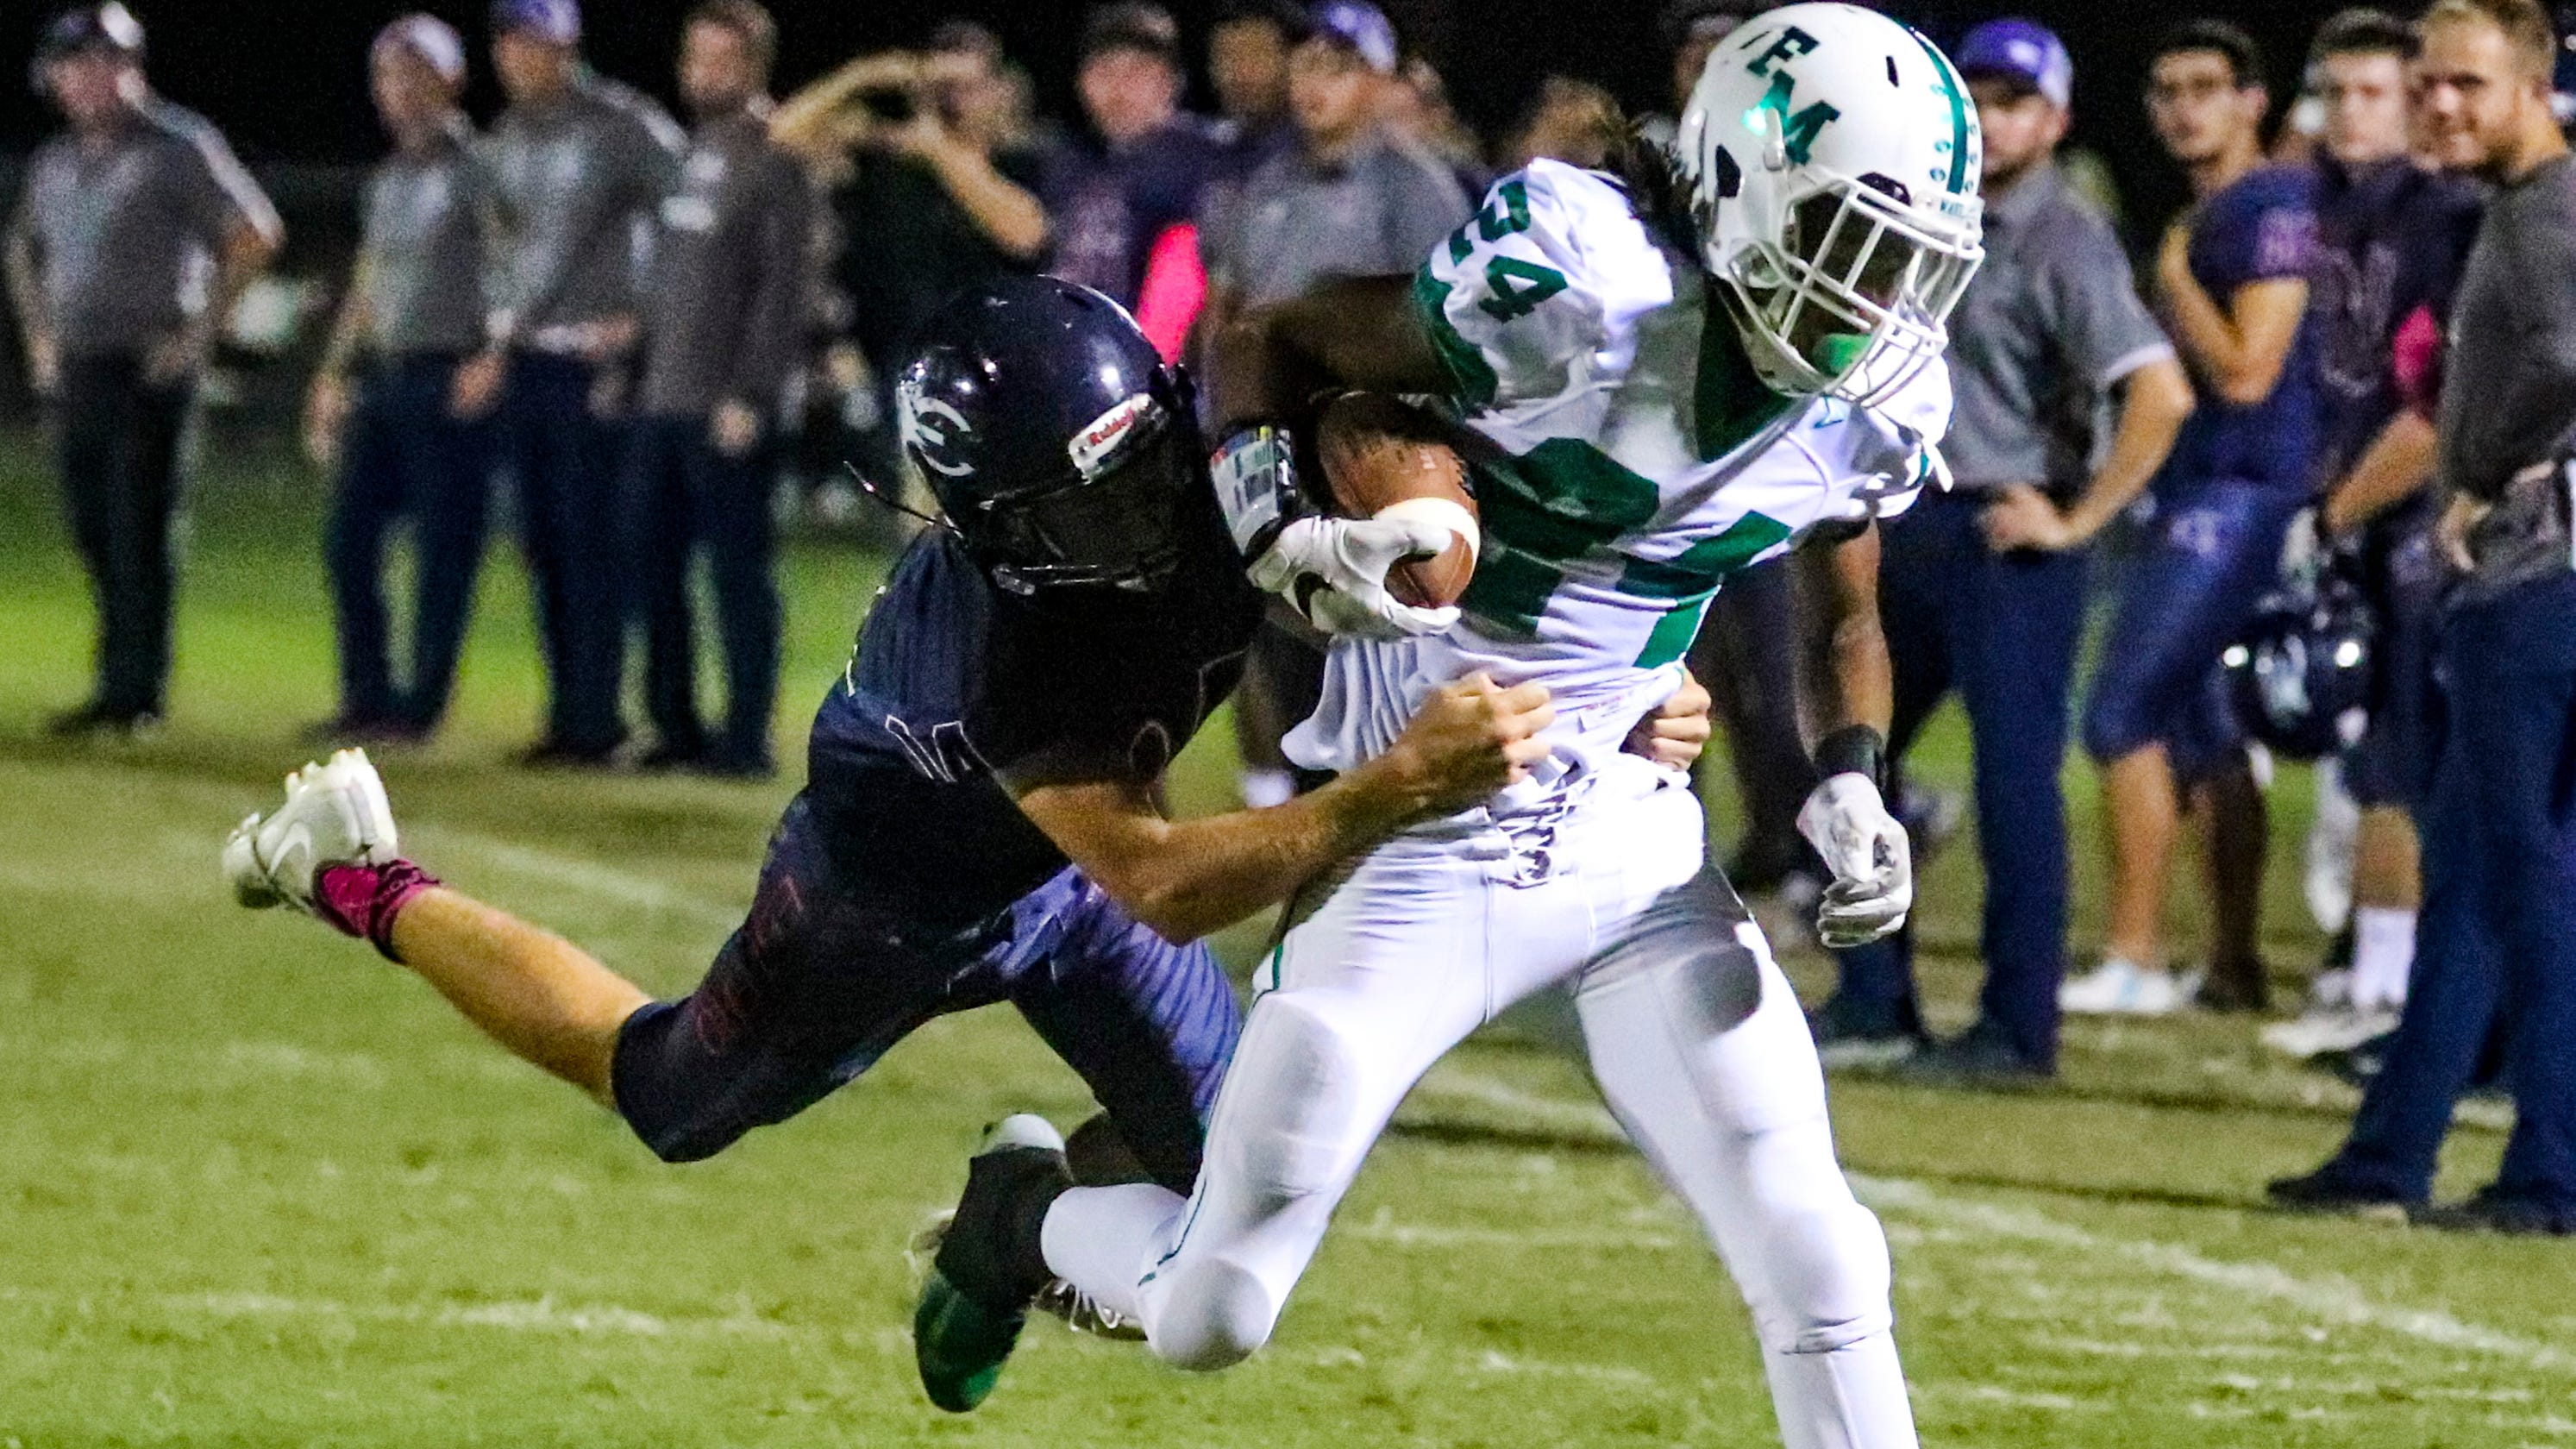 fort-myers-at-estero-high-school-football